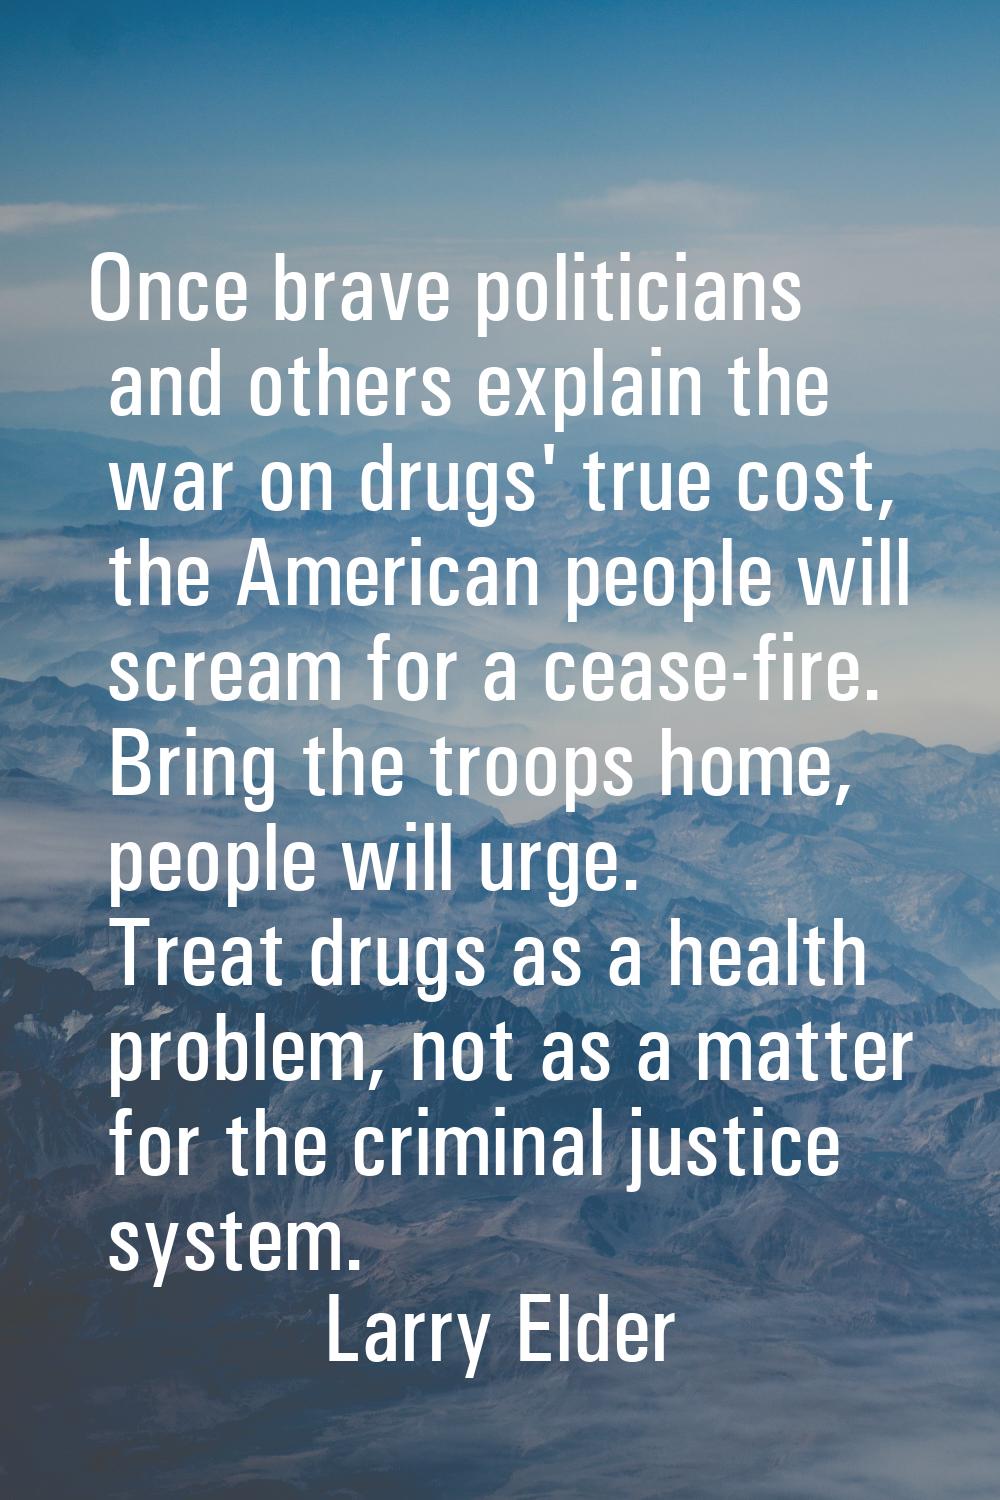 Once brave politicians and others explain the war on drugs' true cost, the American people will scr